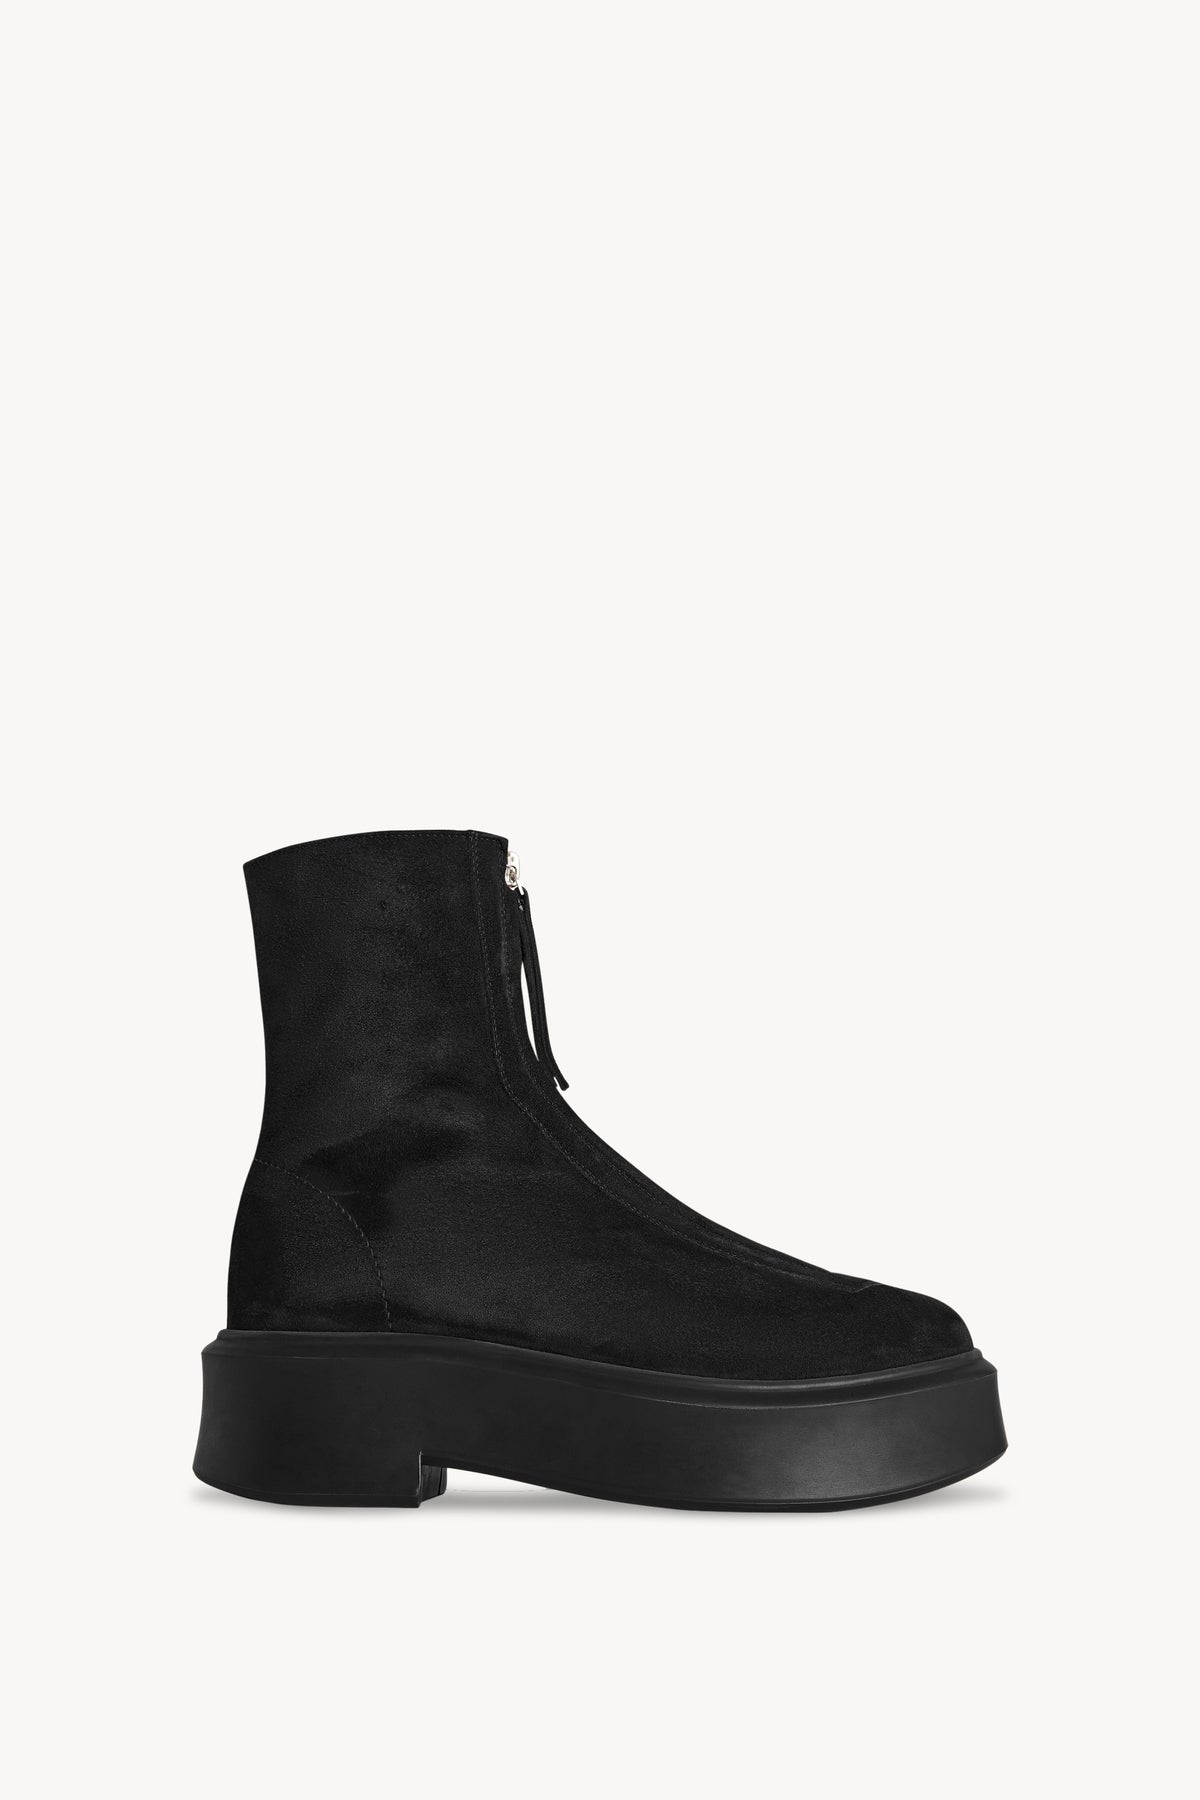 Zipped Boot I in Suede